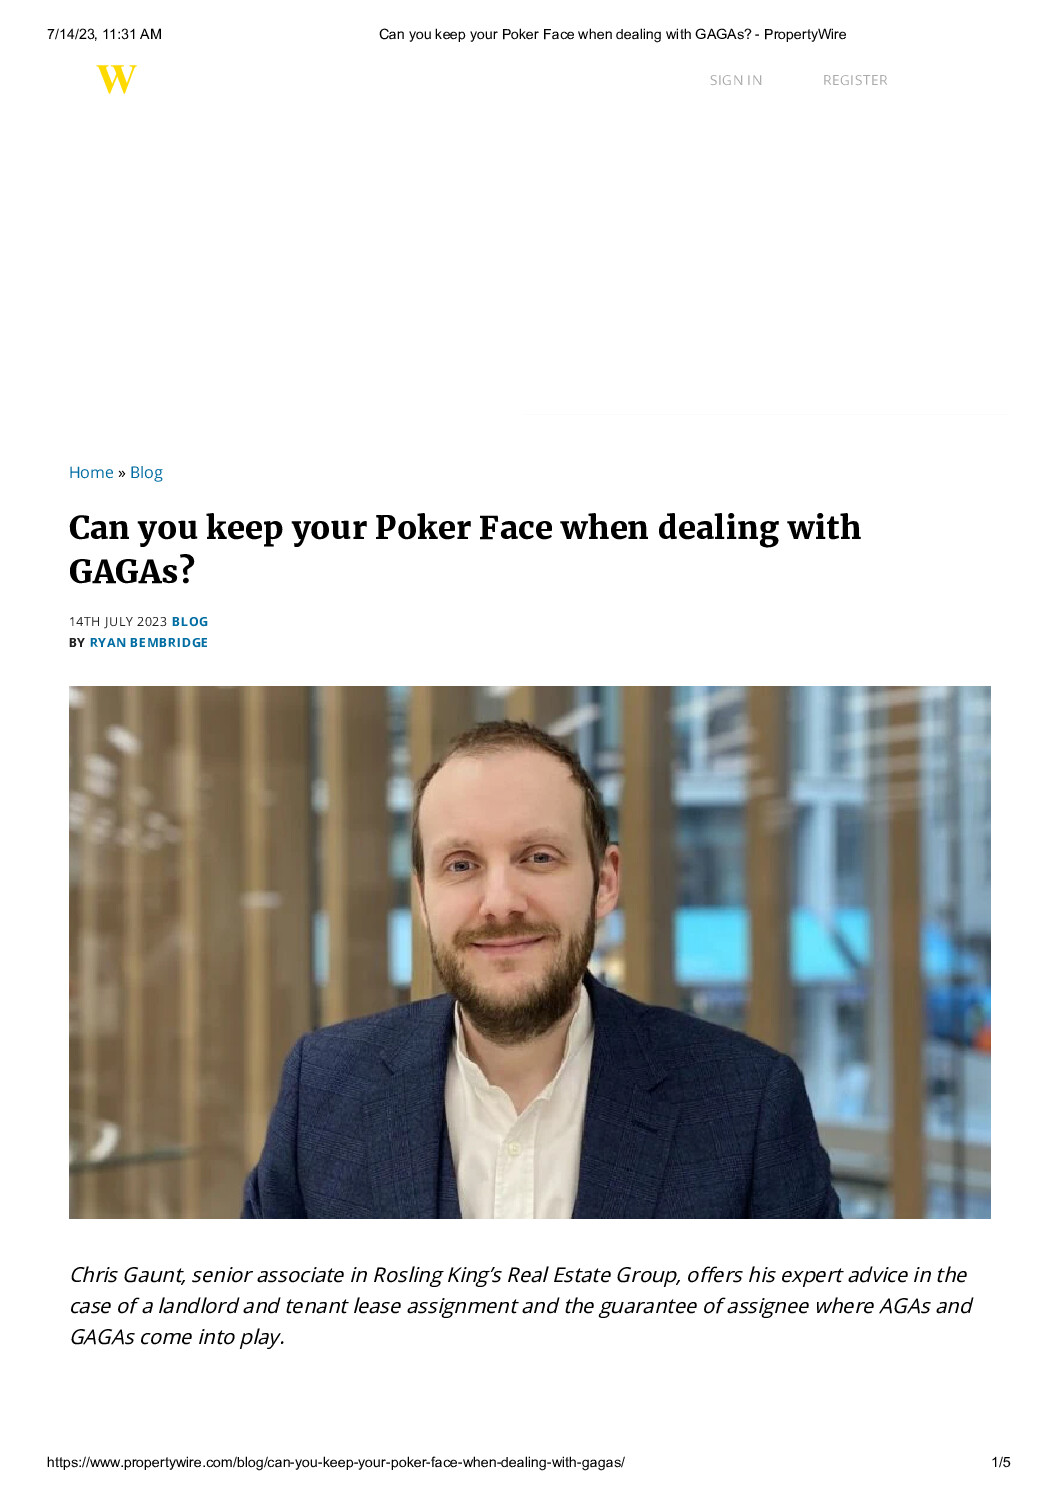 Can you keep your Poker Face when dealing with GAGAs?